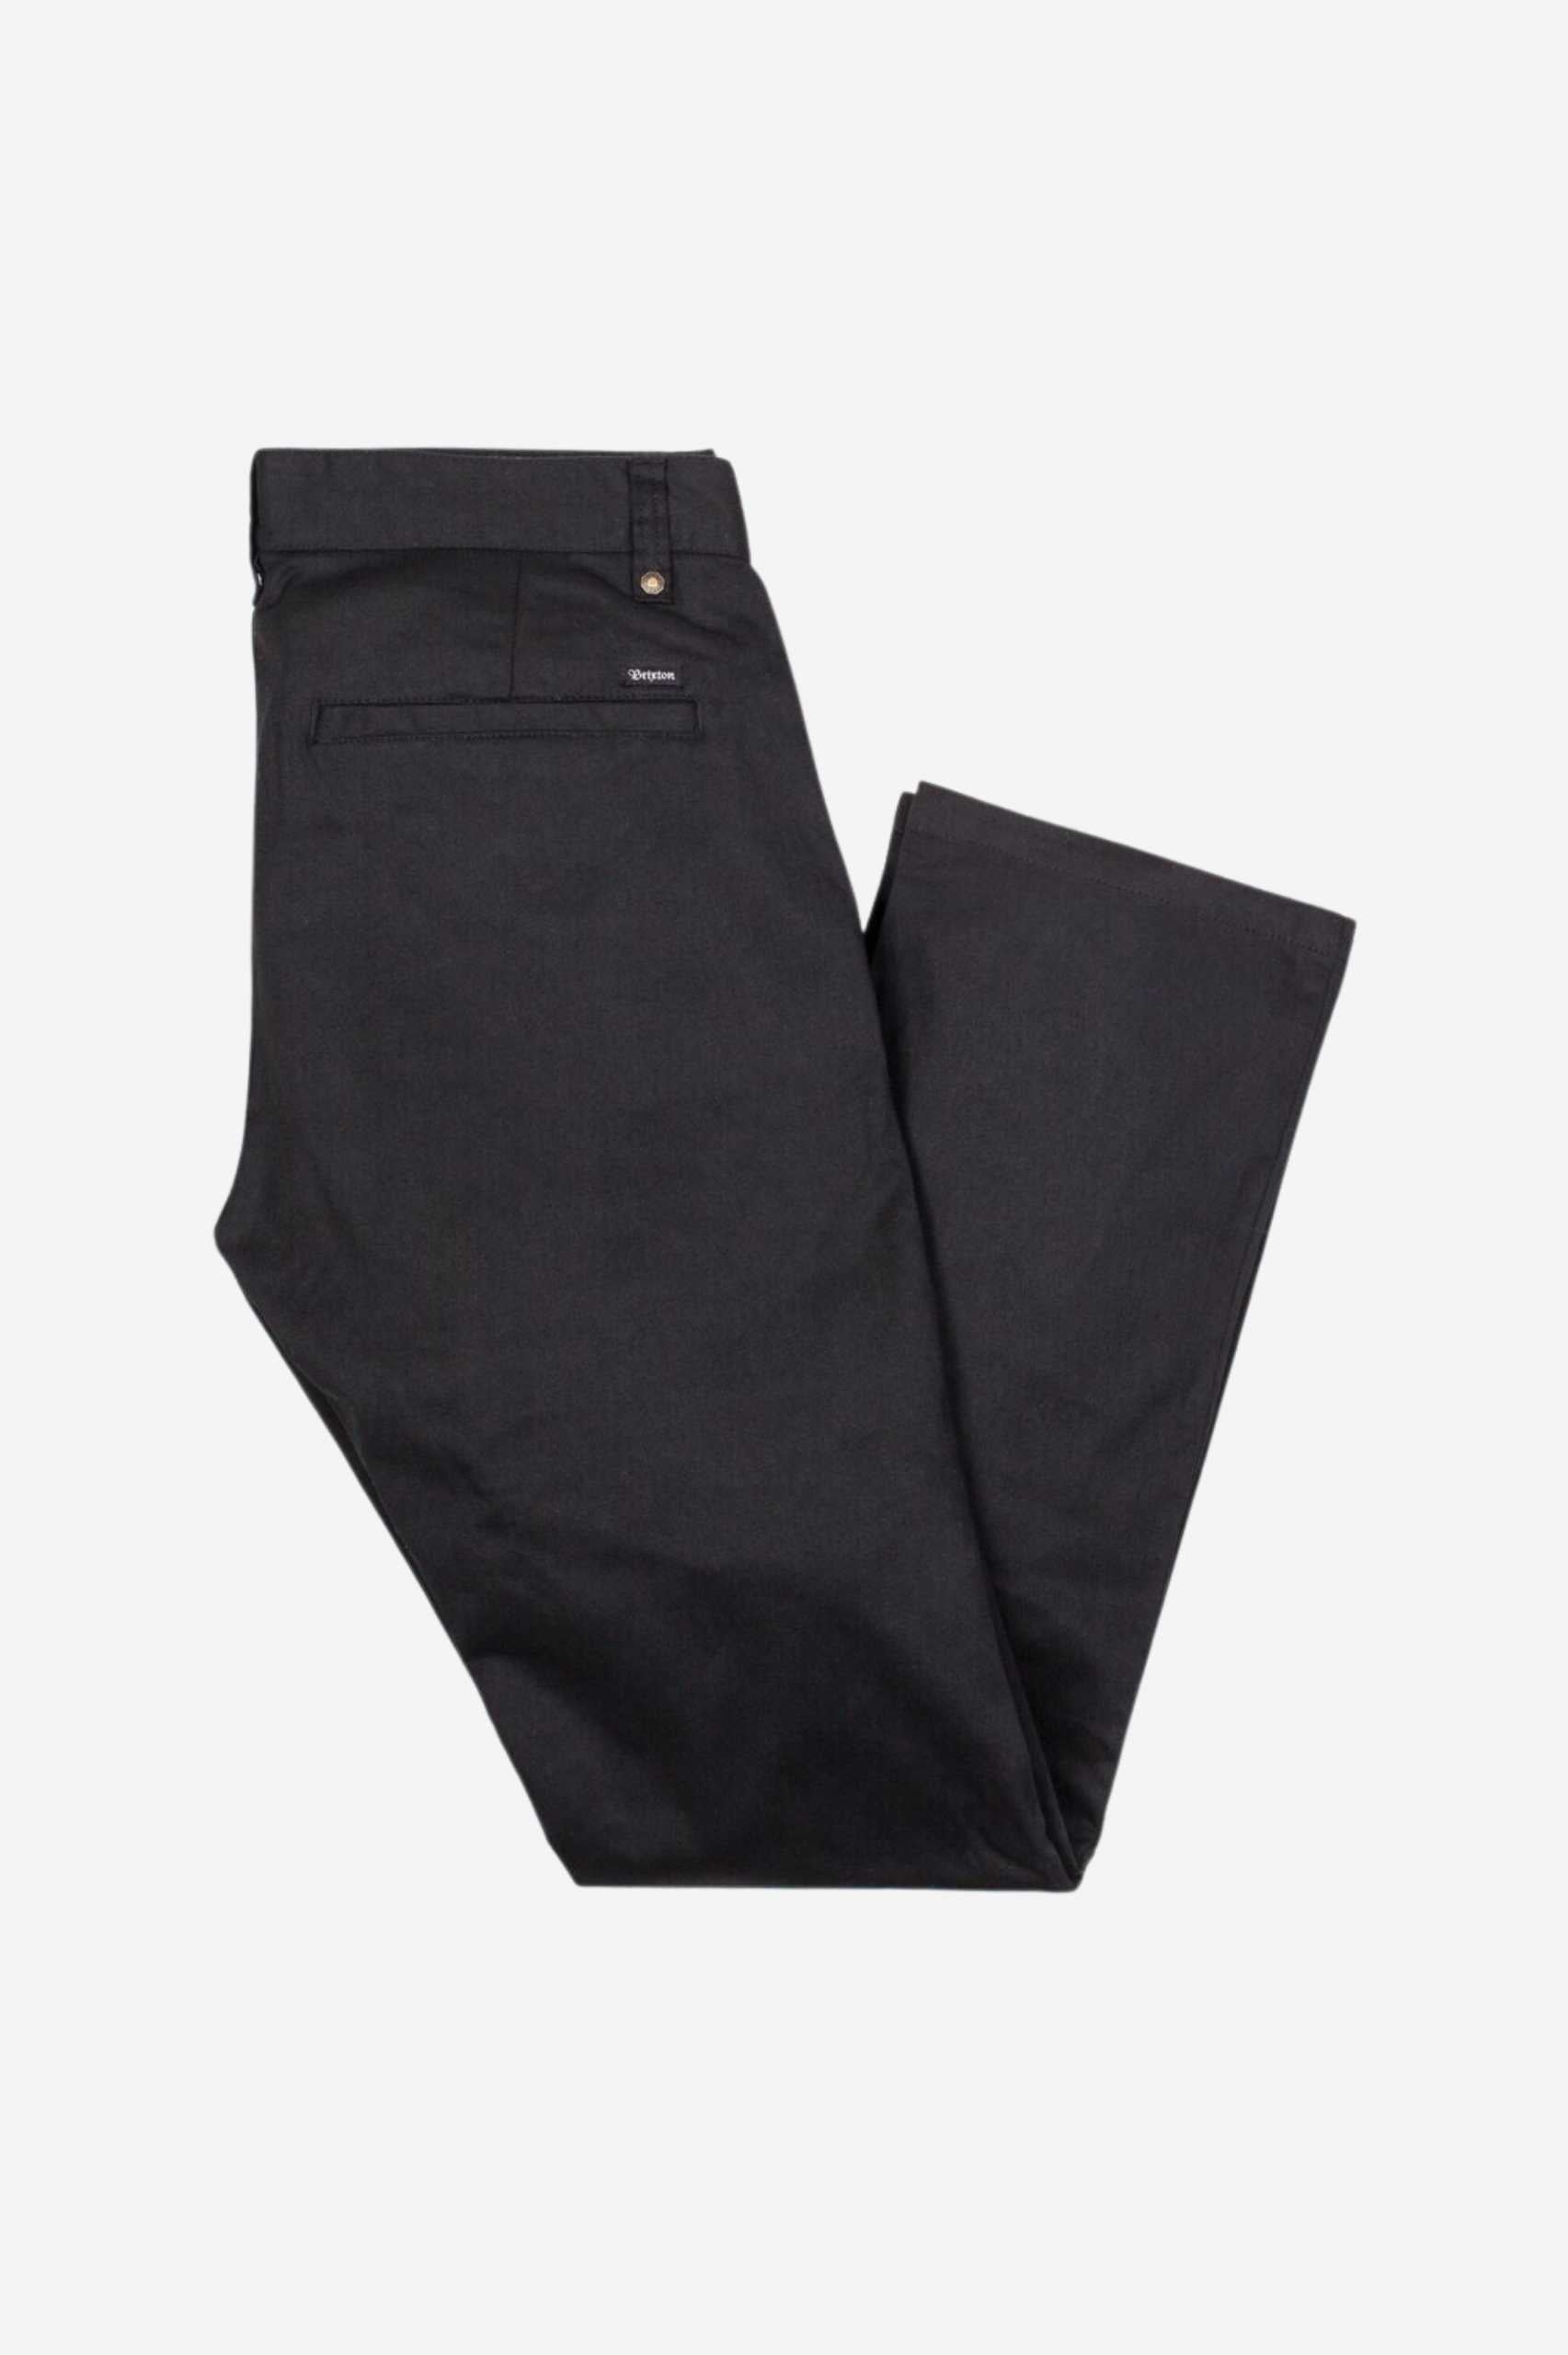 The Brixton Reserve 5-Pocket is a standard-fit pant with a straight leg made in 10-oz. cotton/polyester twill with 1% stretch. It features a button fly, custom Brixton labeling, graded inseam, and a 16 inch leg opening.